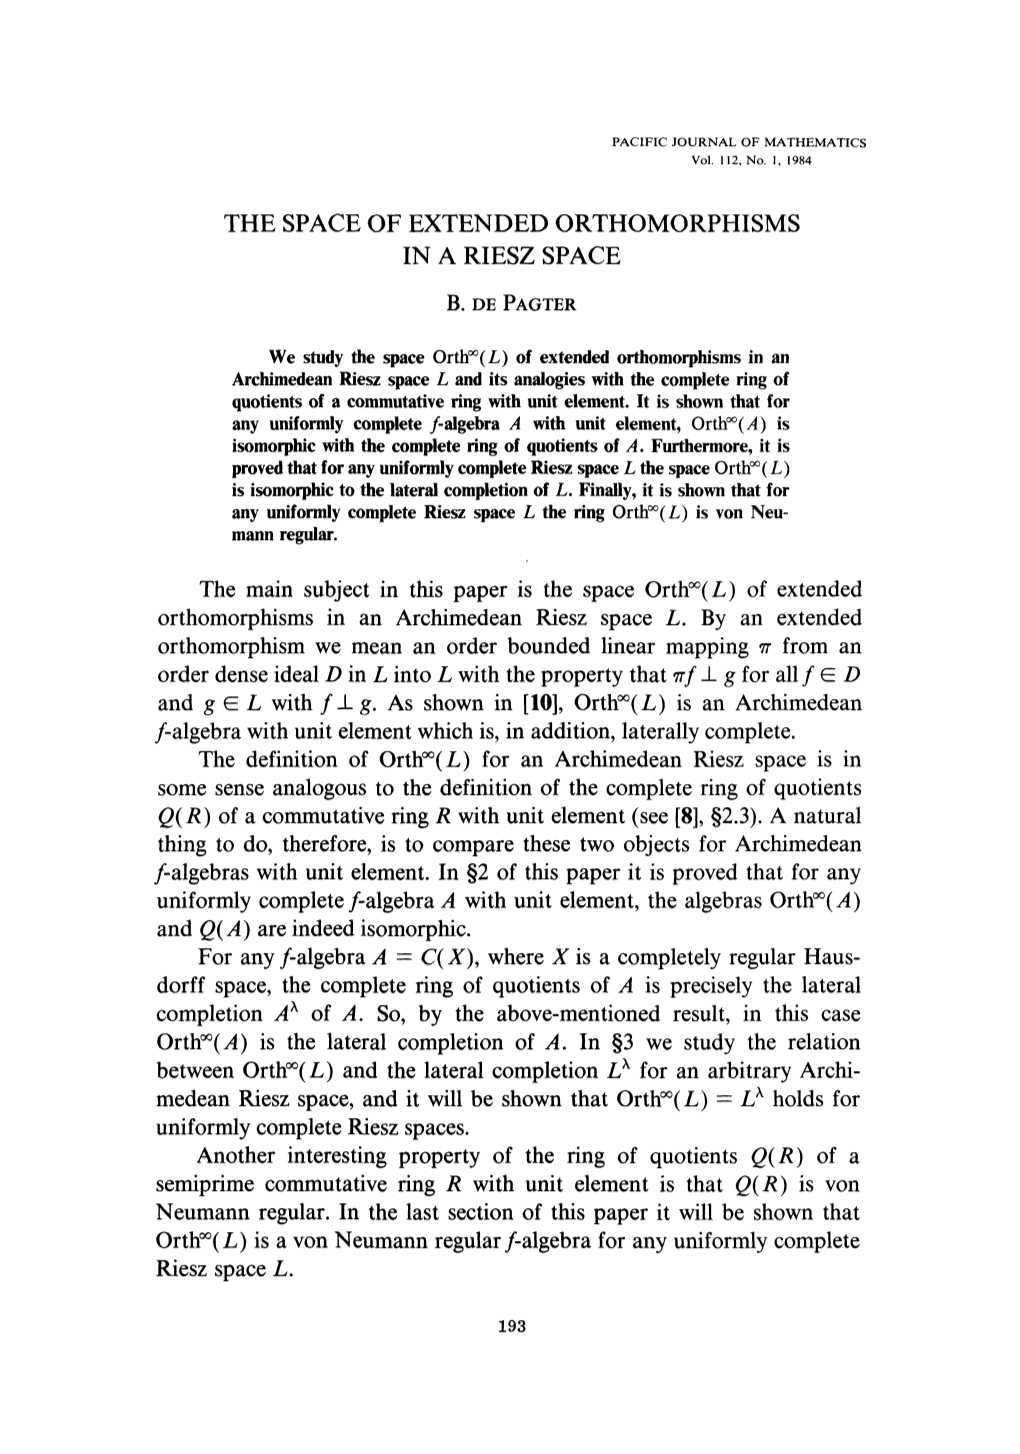 The Space of Extended Orthomorphisms in a Riesz Space